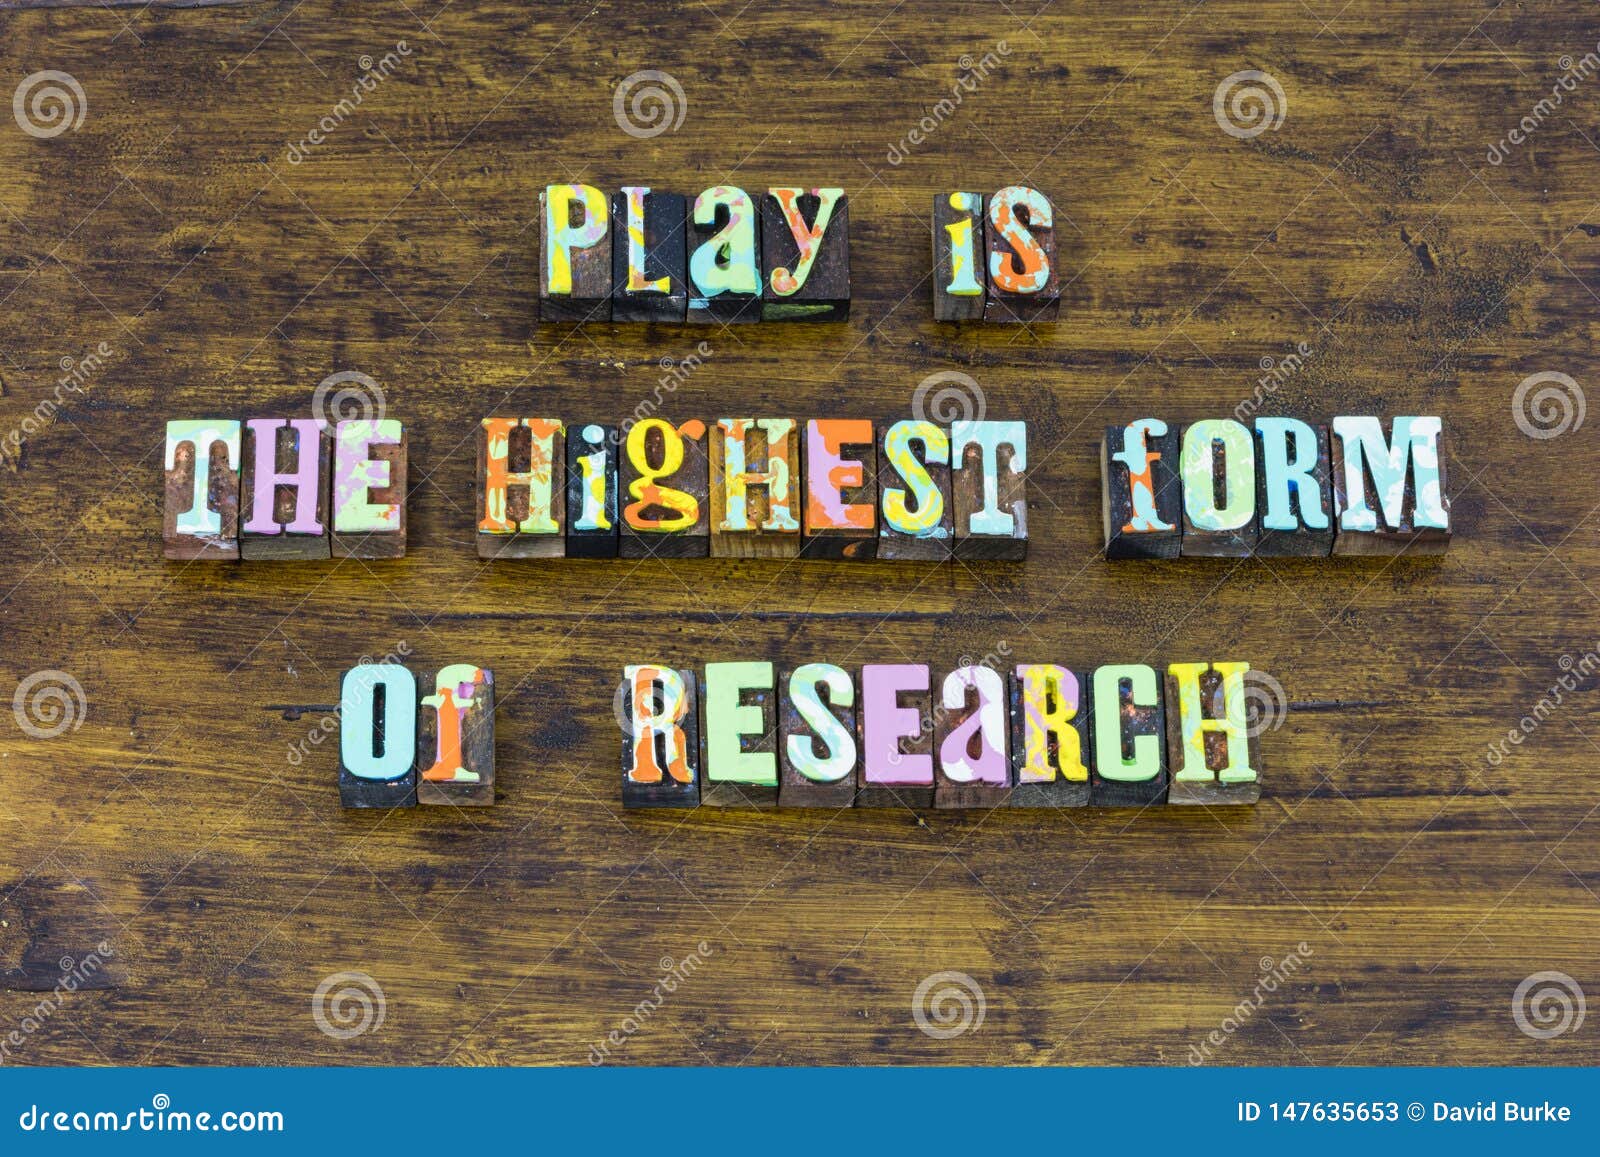 play hard education learning research school learn study work